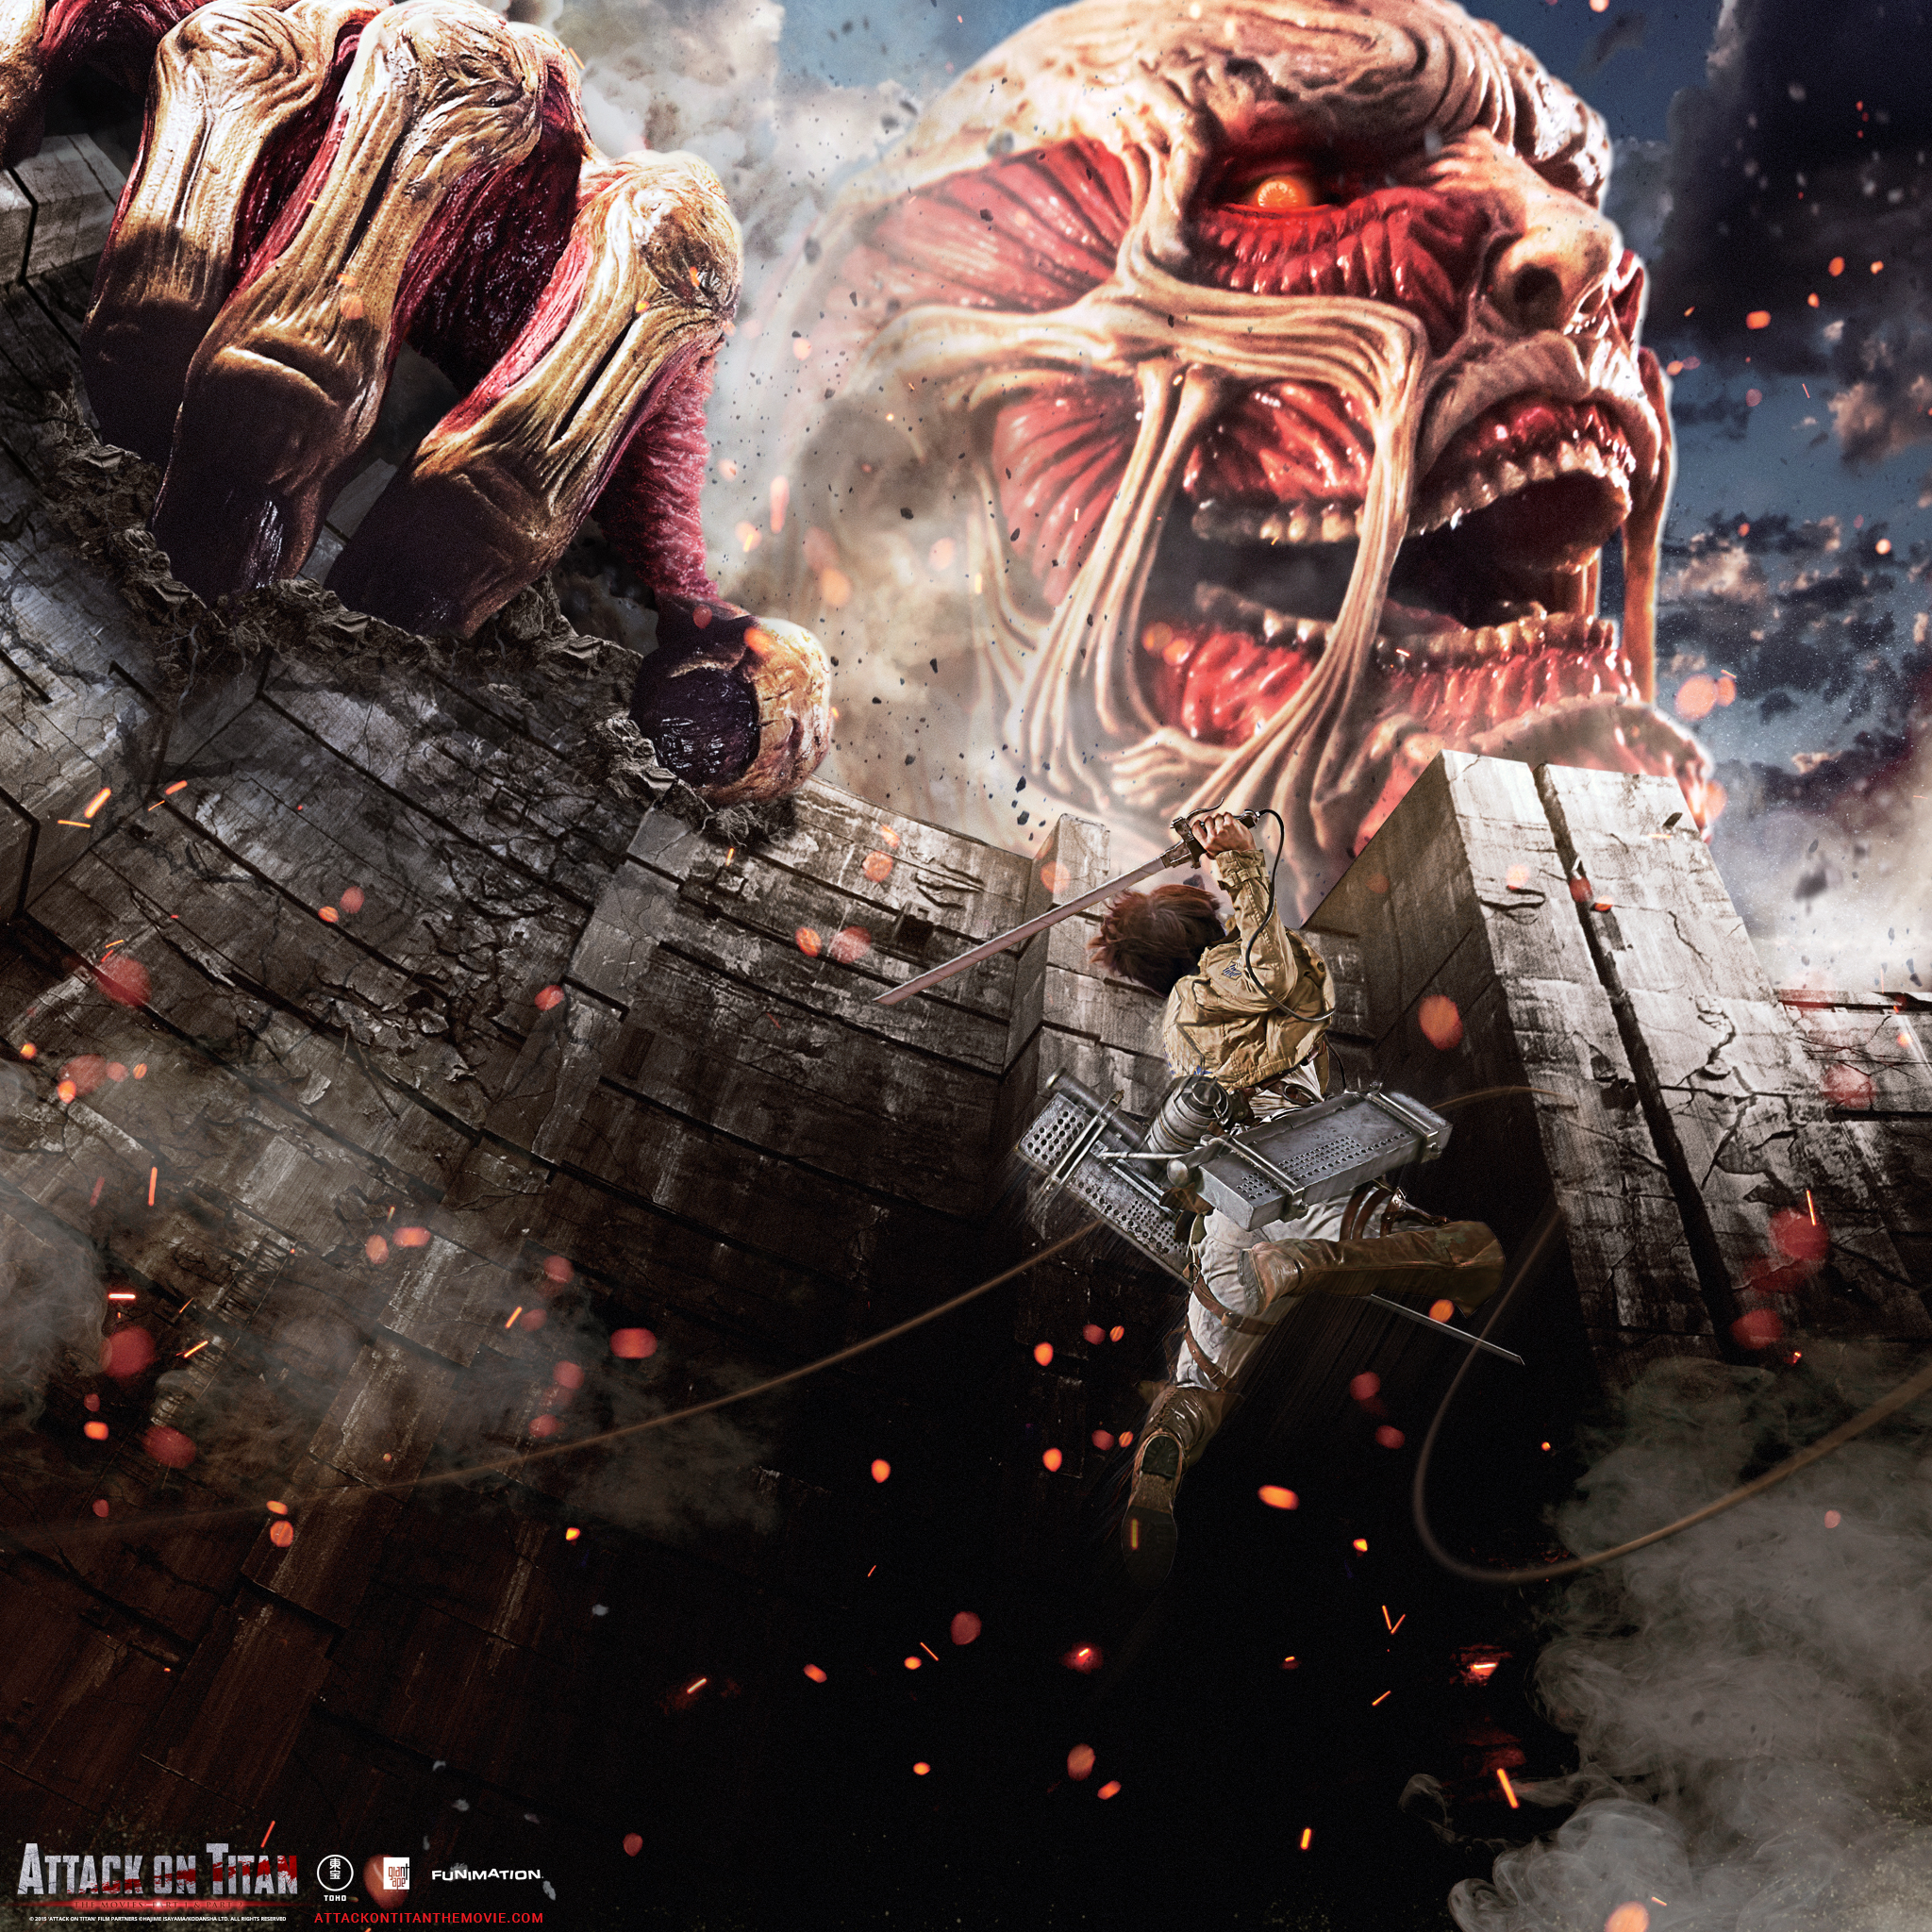 Extras of Attack on Titan, The Movie. The Official Site